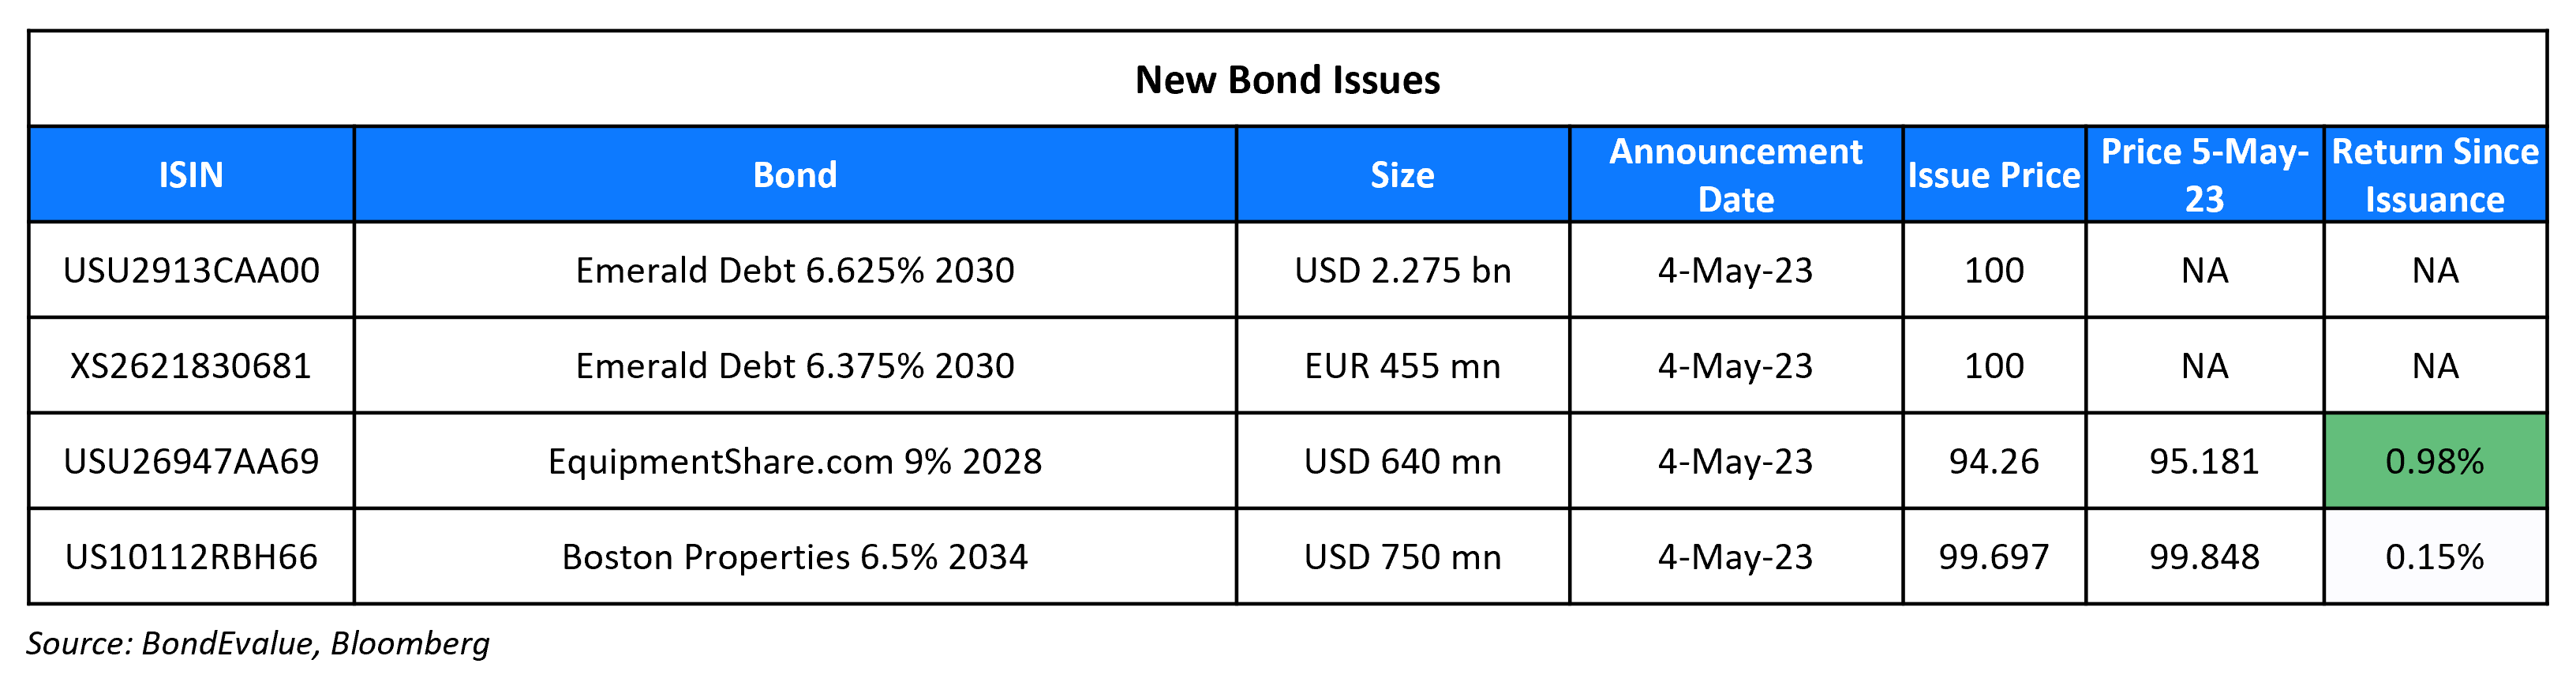 New Bond Issues 5 May 23